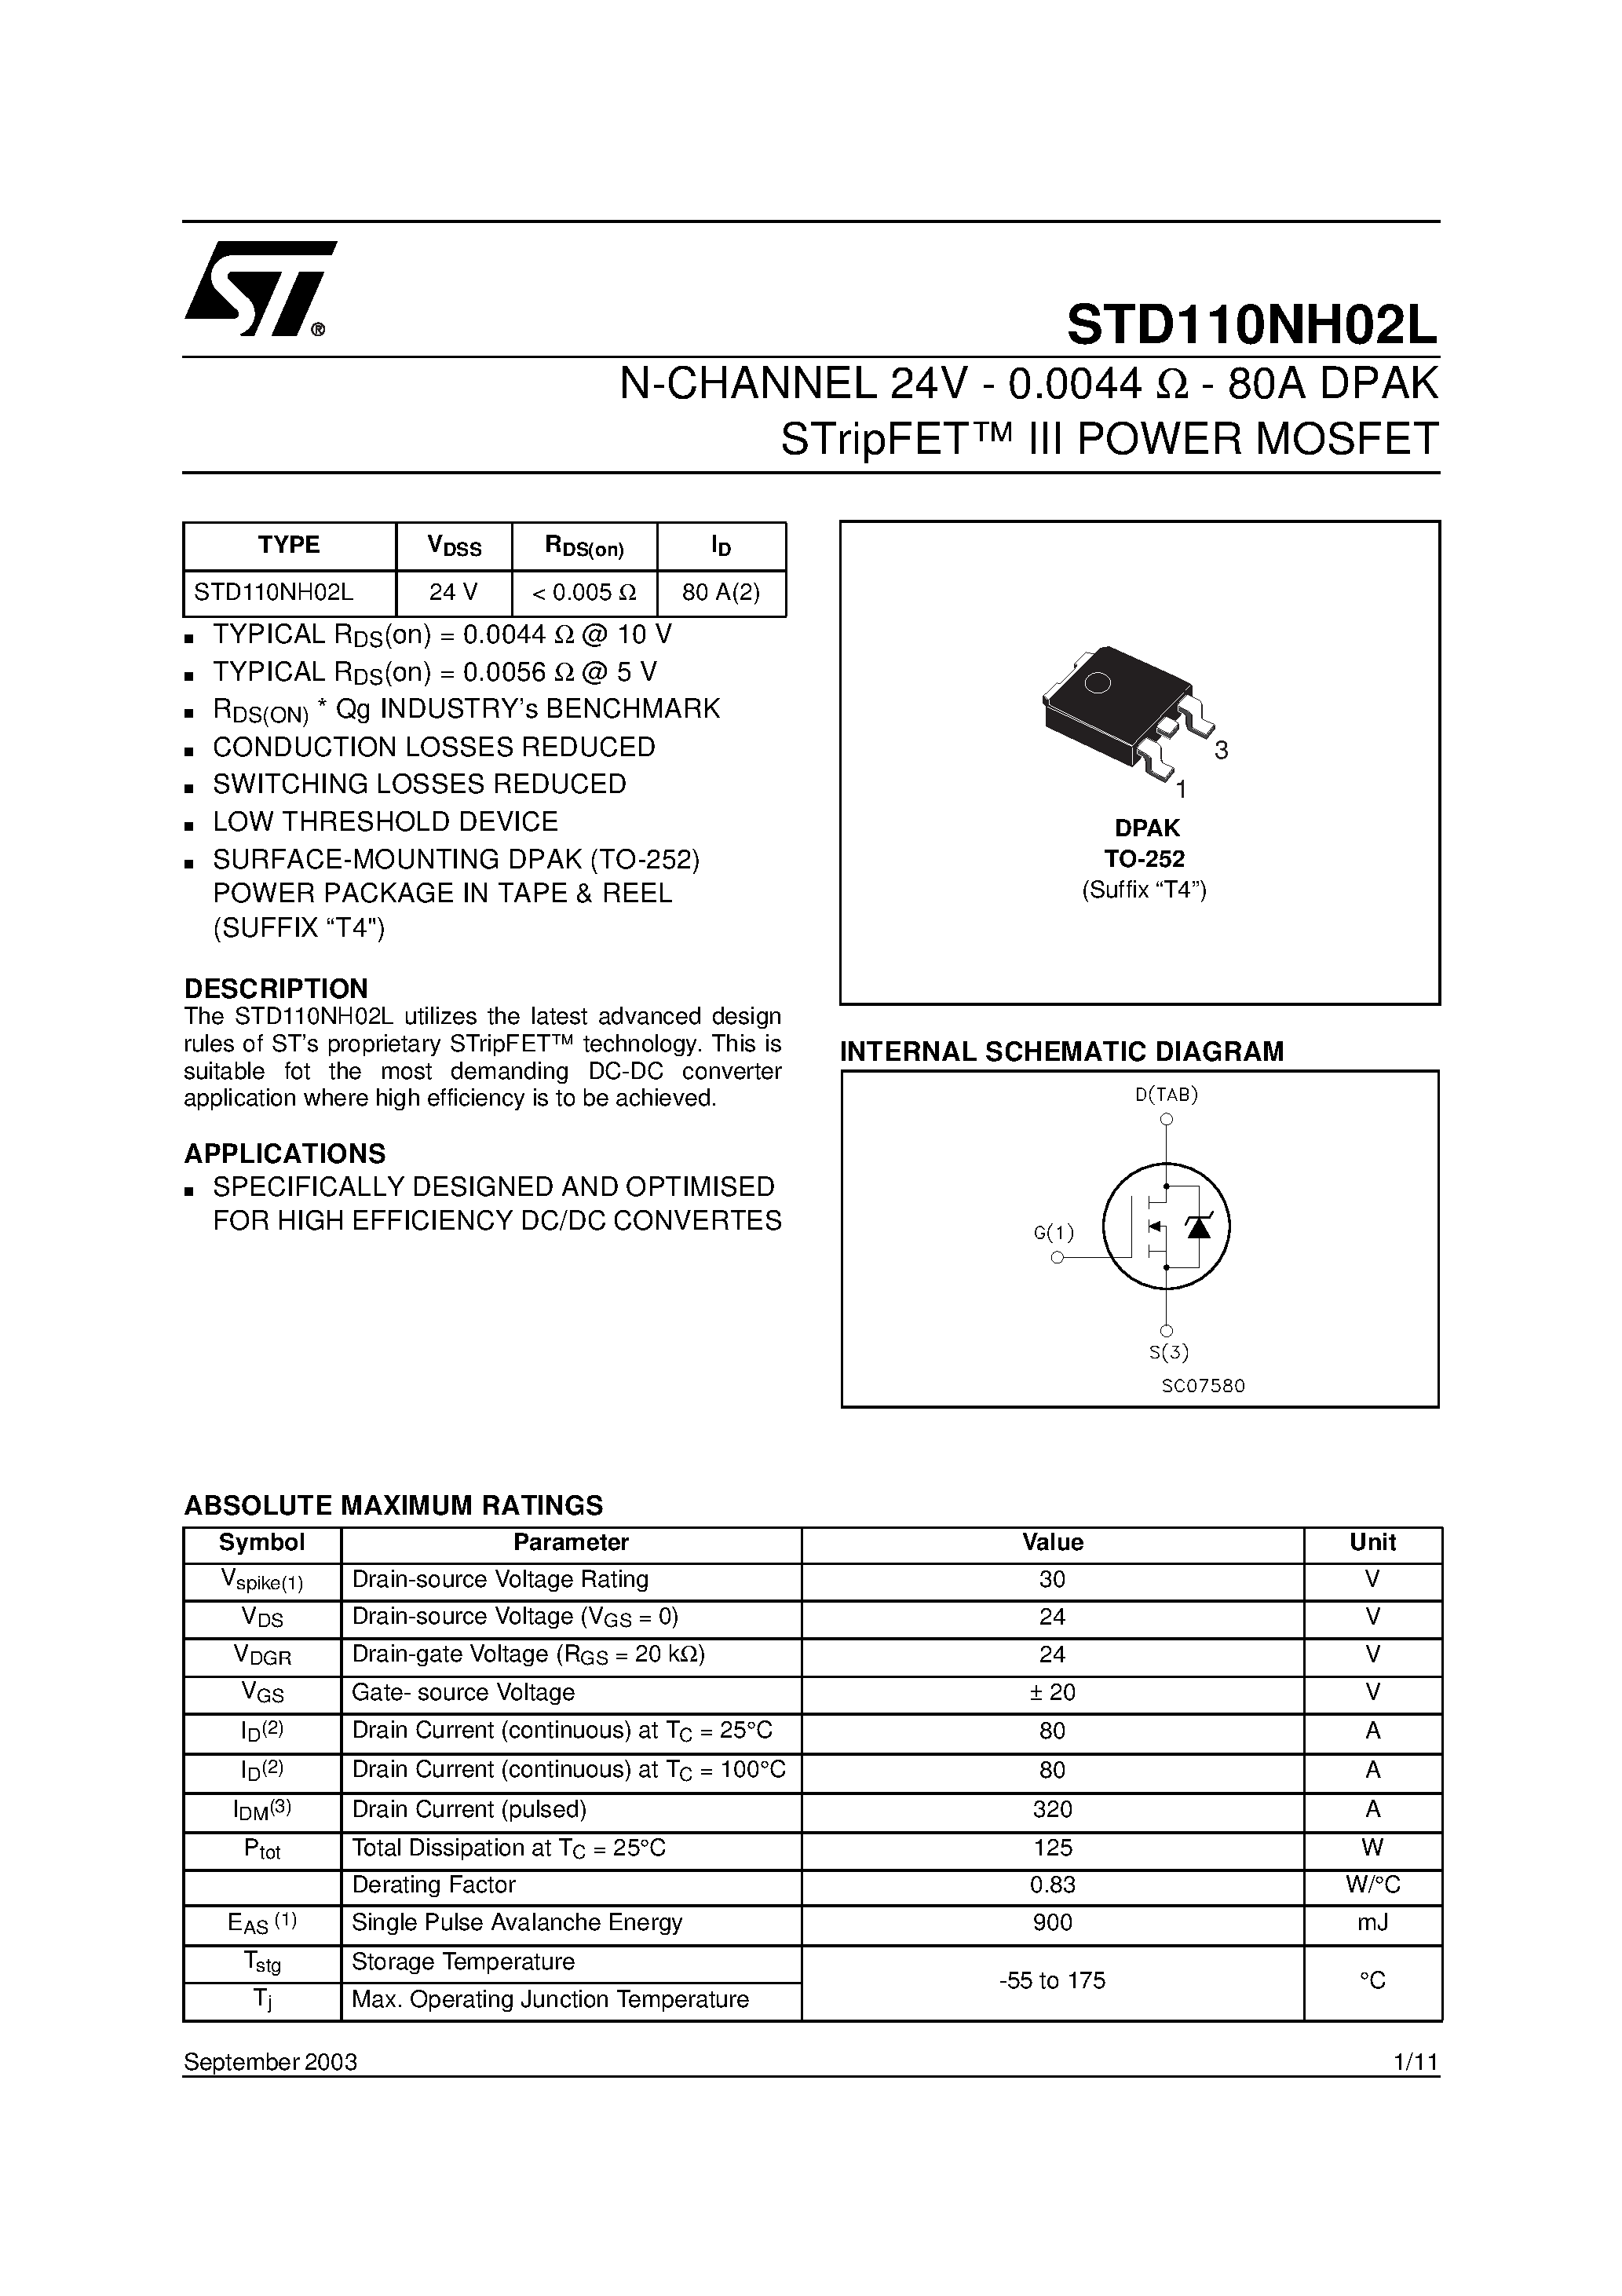 Datasheet STD110NH02L - N-CHANNEL POWER MOSFET page 1